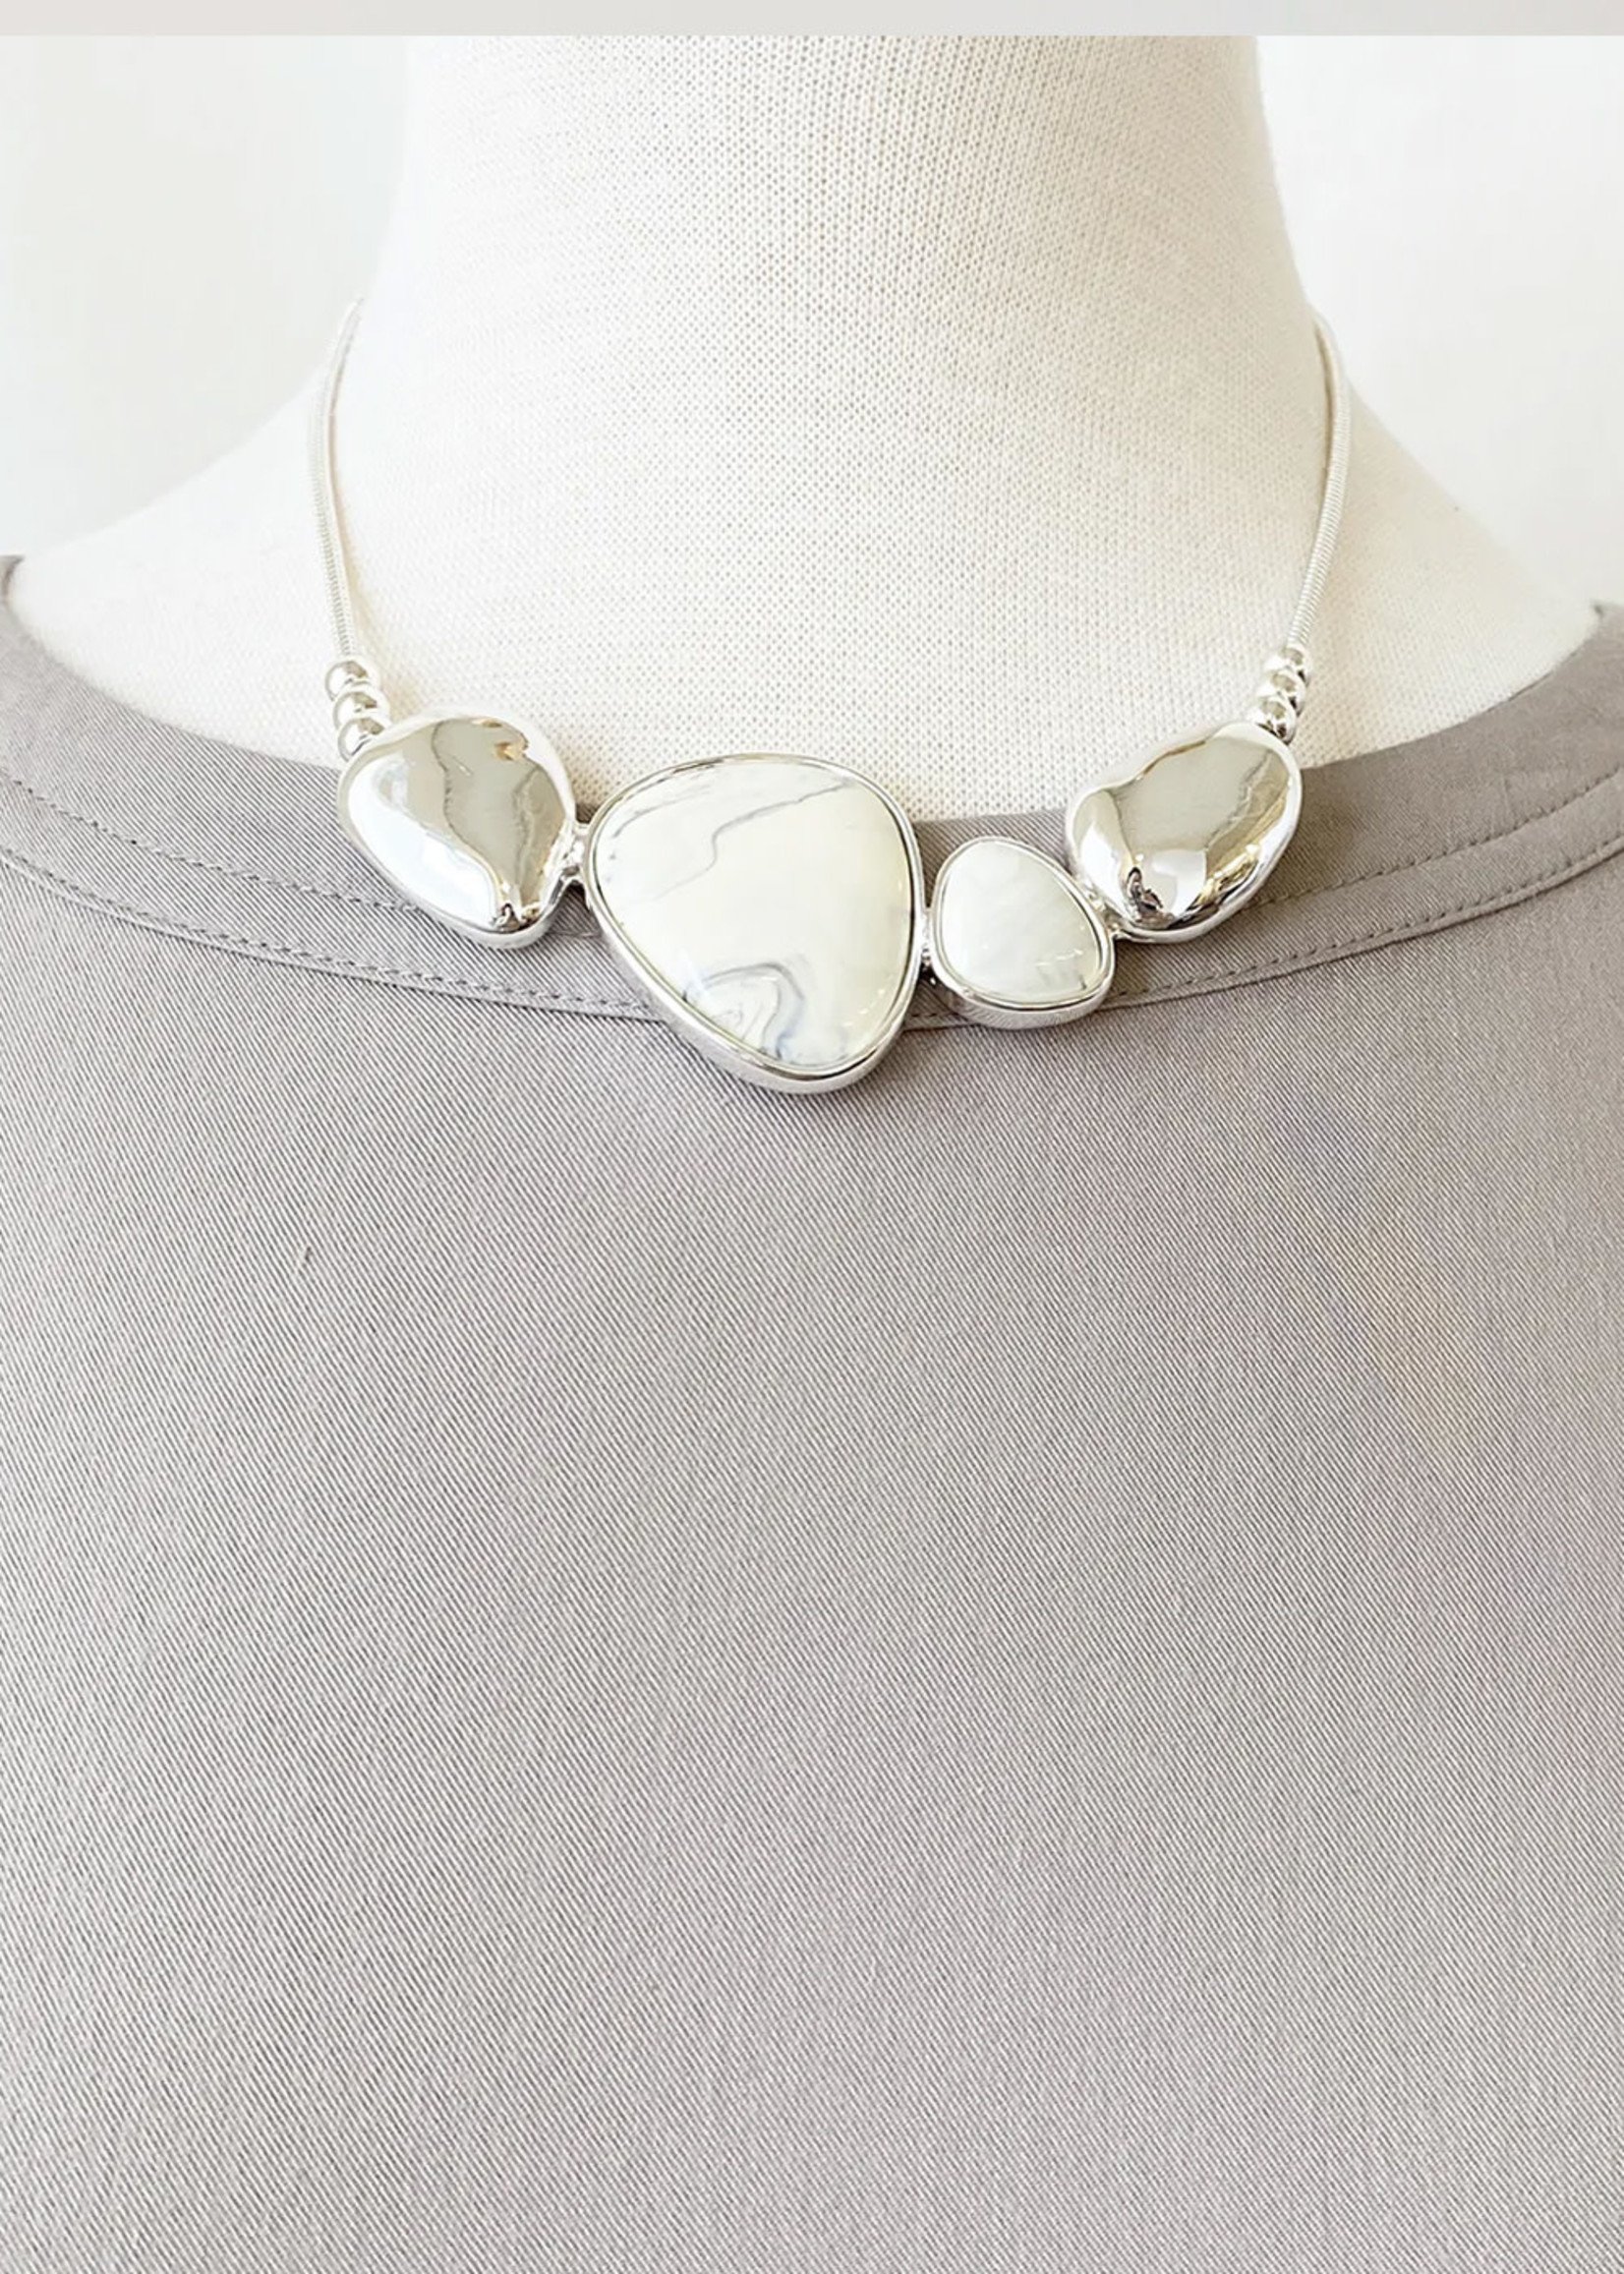 White & Silver Statement Necklace with Metal & Resin on Snake Chain